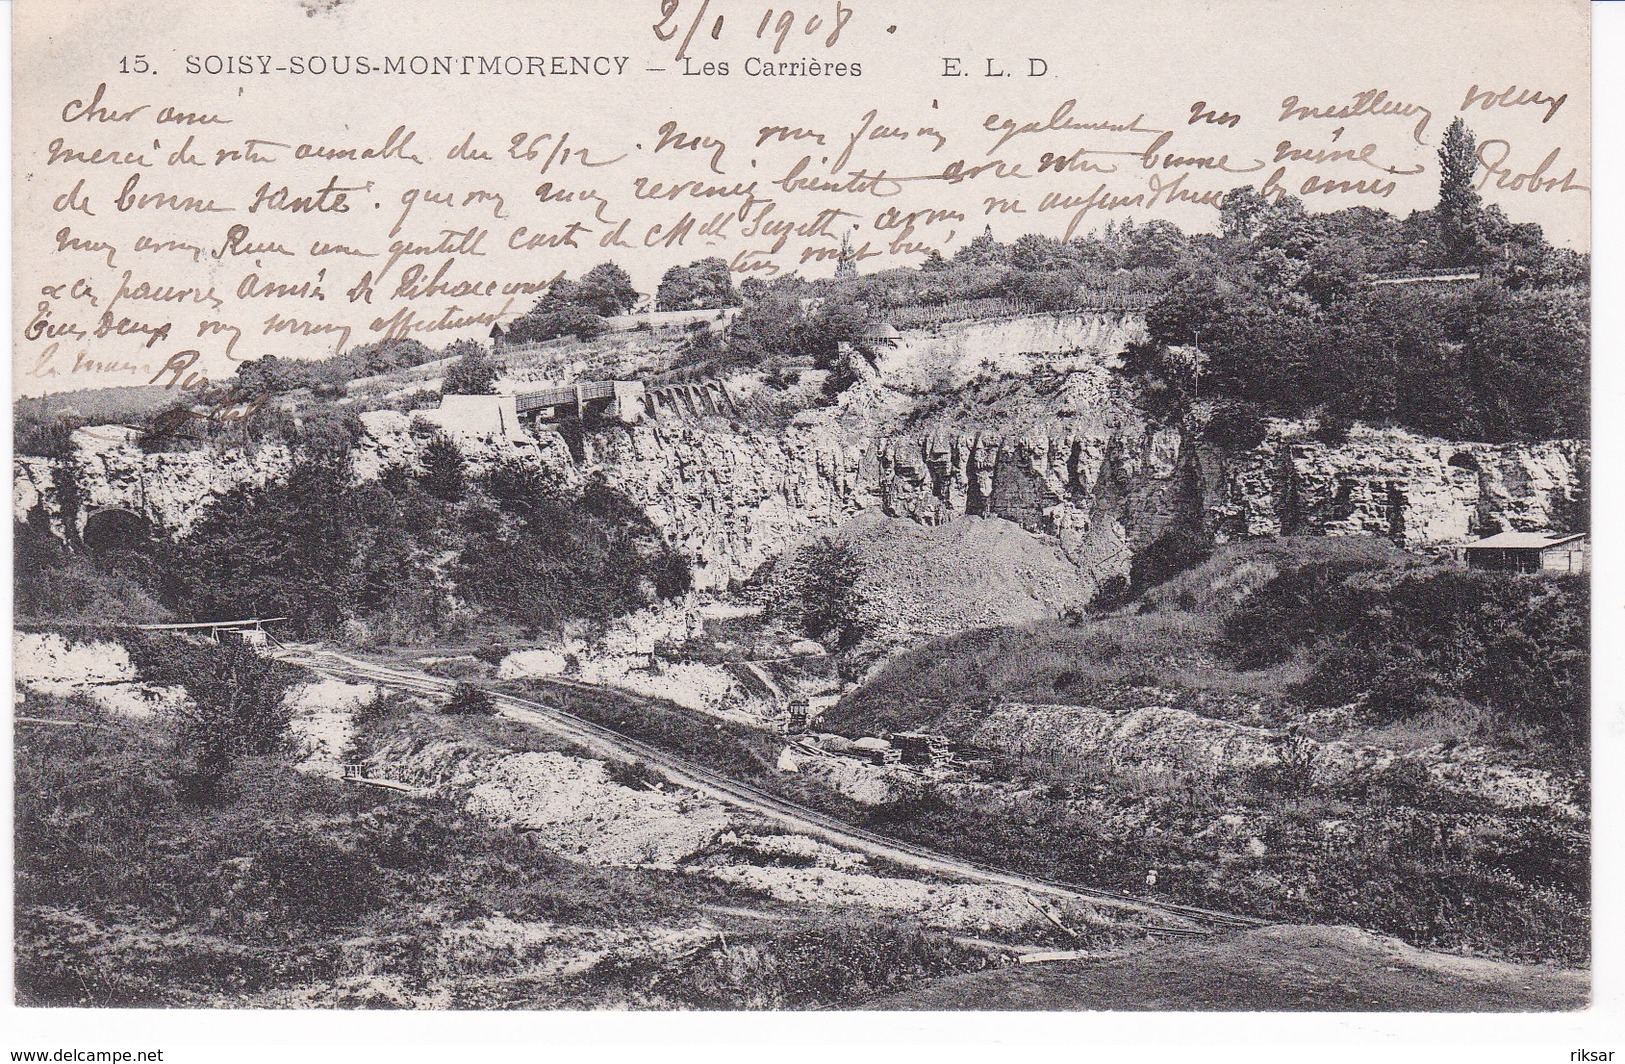 SOISY SOUS MONTMORENCY(LES CARRIERES) - Soisy-sous-Montmorency